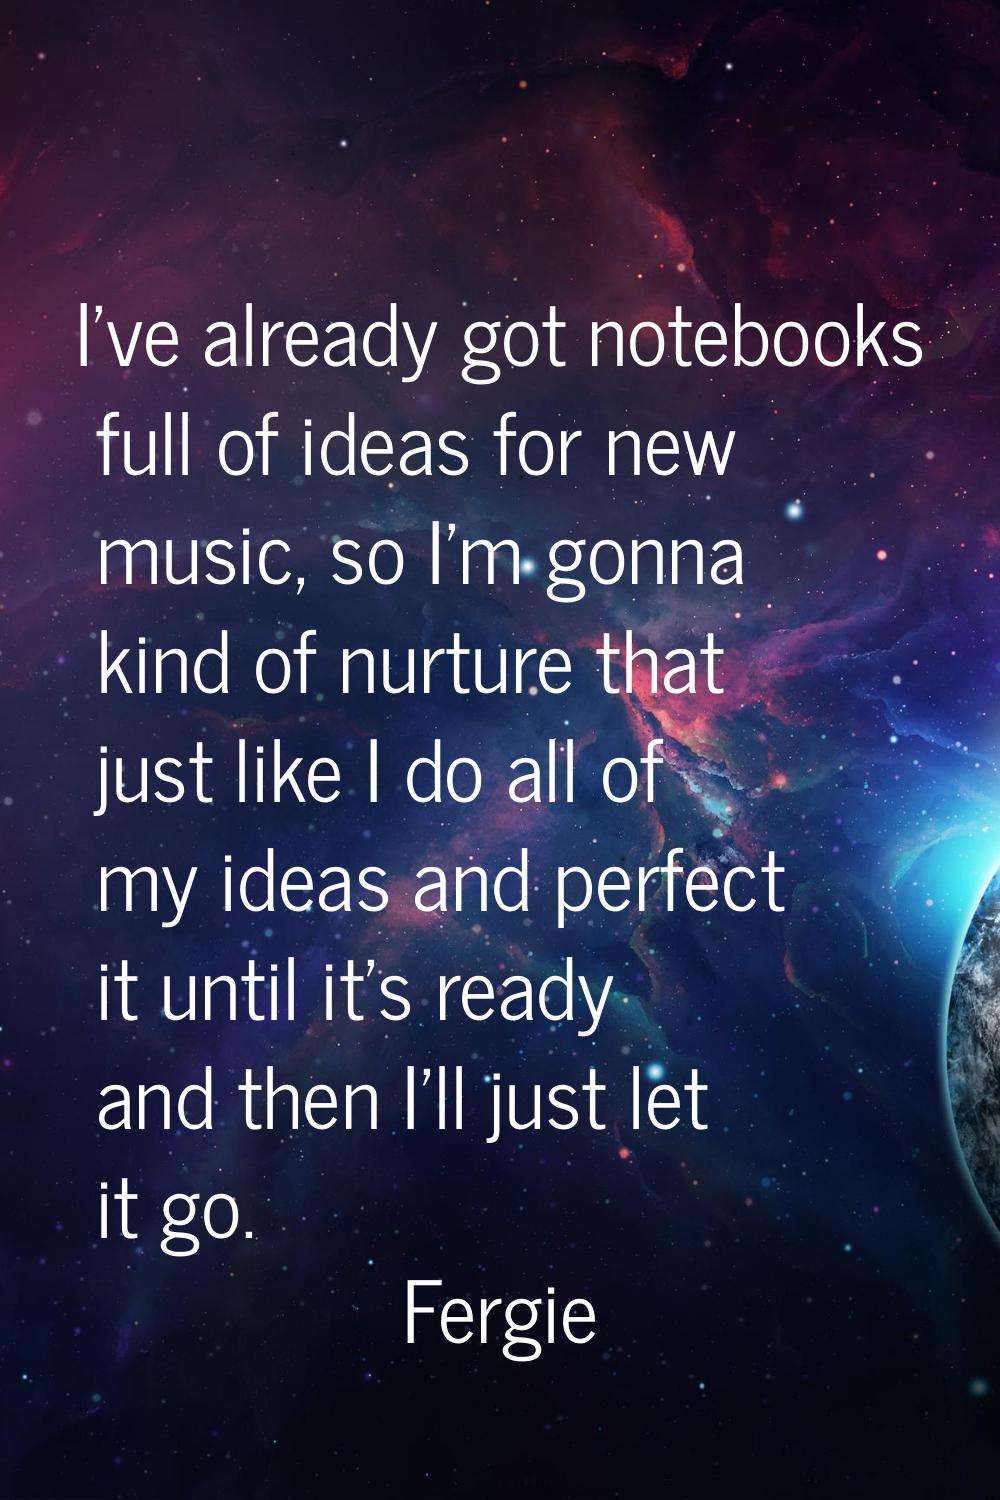 I've already got notebooks full of ideas for new music, so I'm gonna kind of nurture that just like